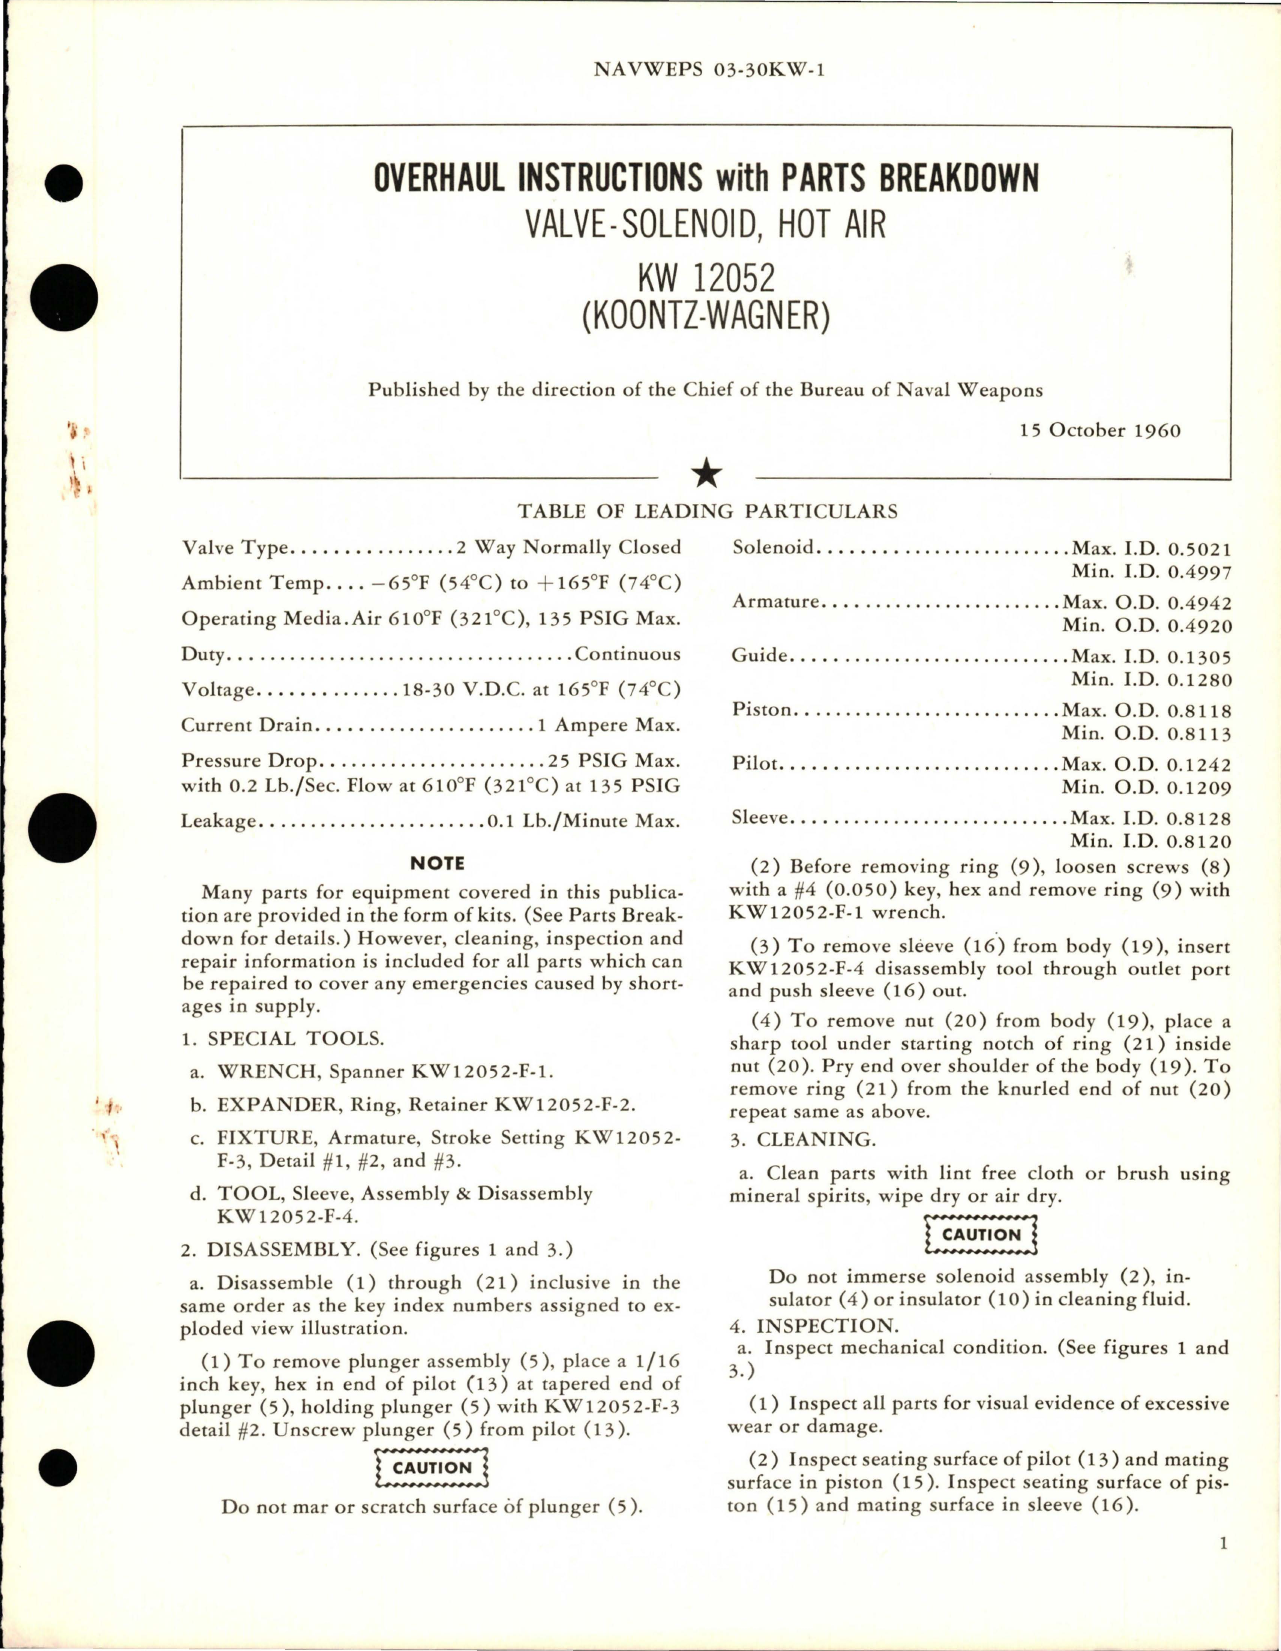 Sample page 1 from AirCorps Library document: Overhaul Instructions with Parts Breakdown for Hot Air Solenoid Valve - KW 12052